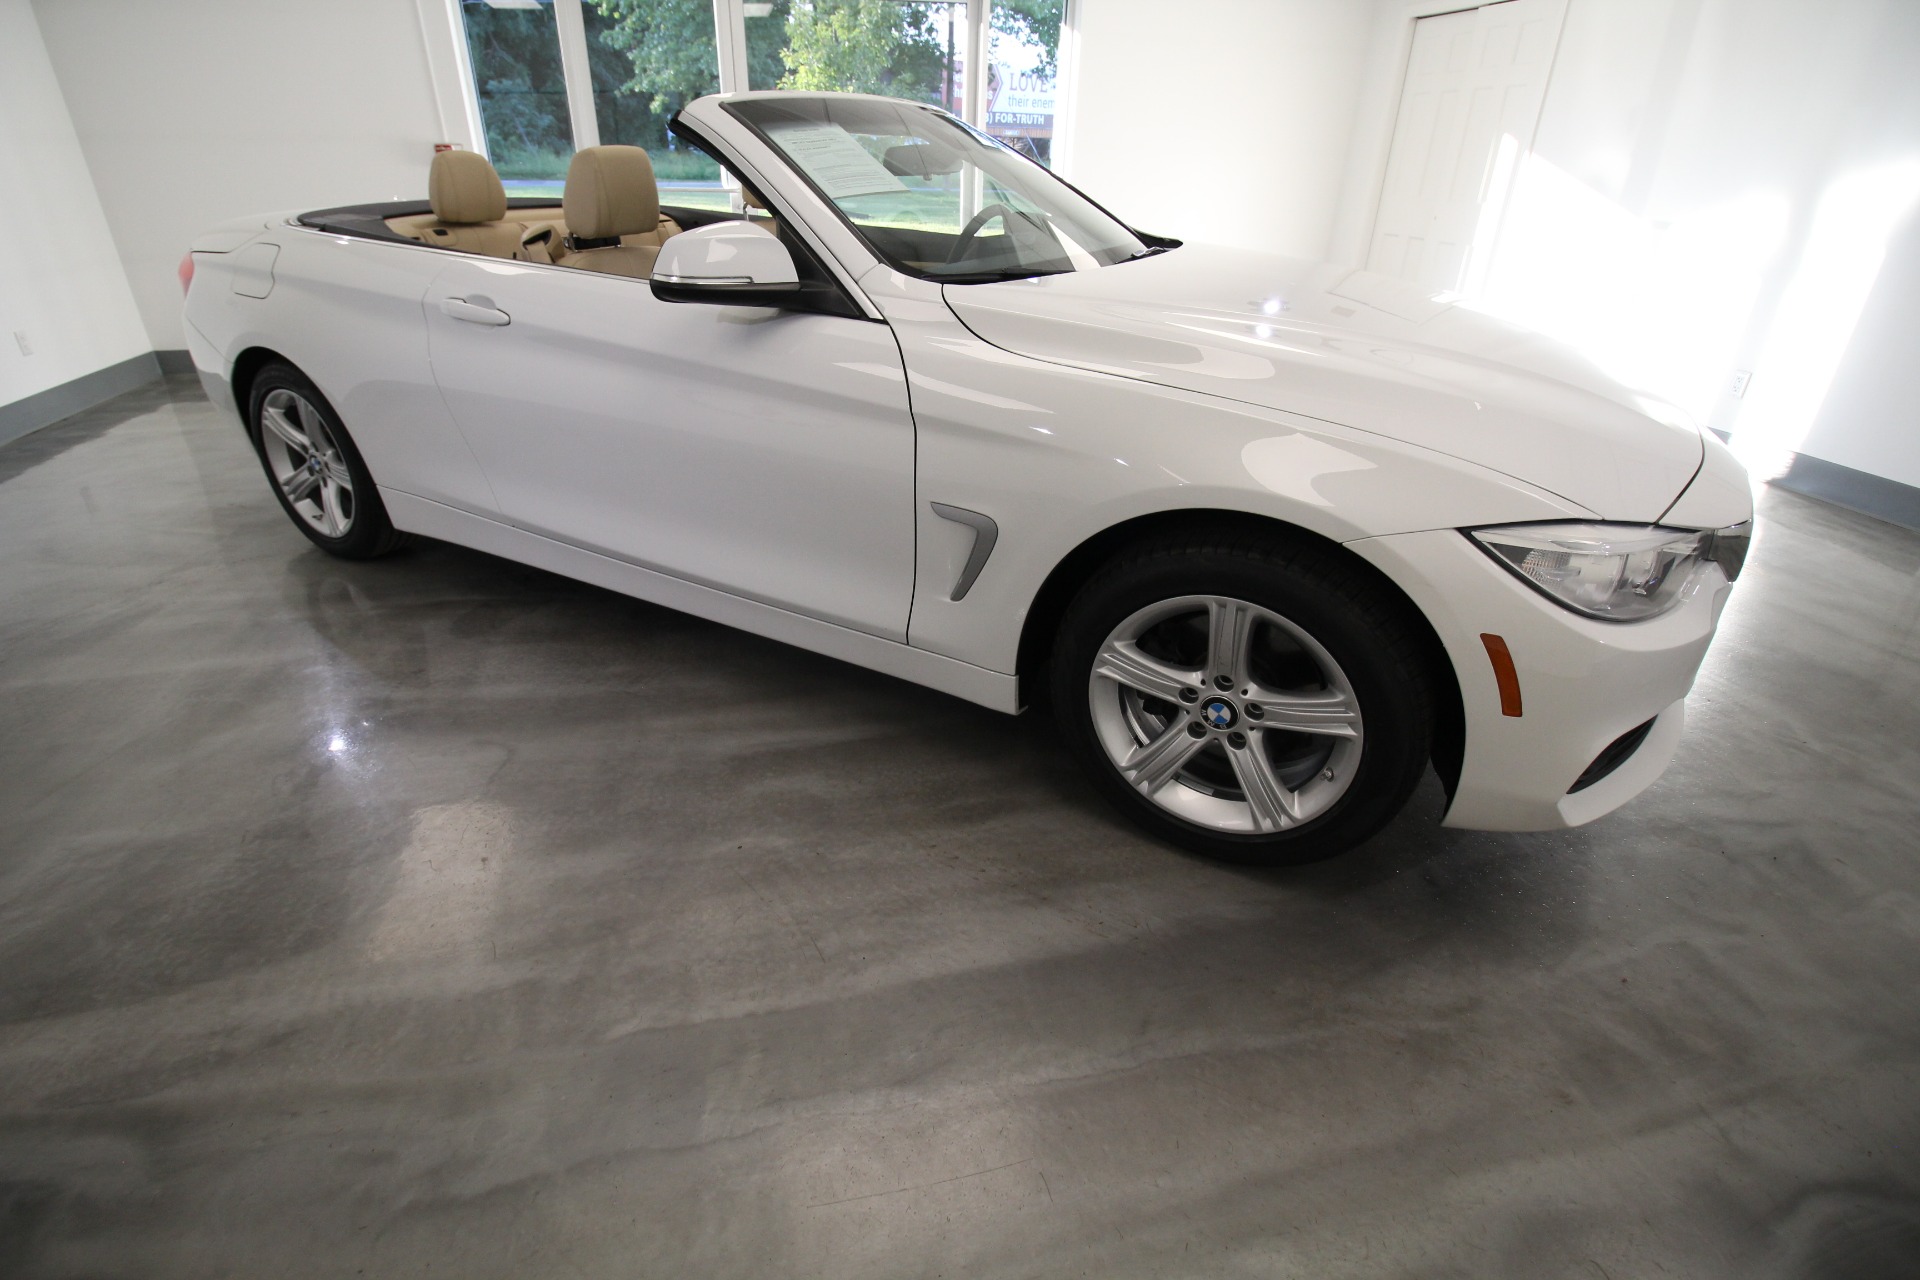 Used 2014 Alpine White BMW 4-Series 428i xDrive SULEV Convertible | Albany, NY